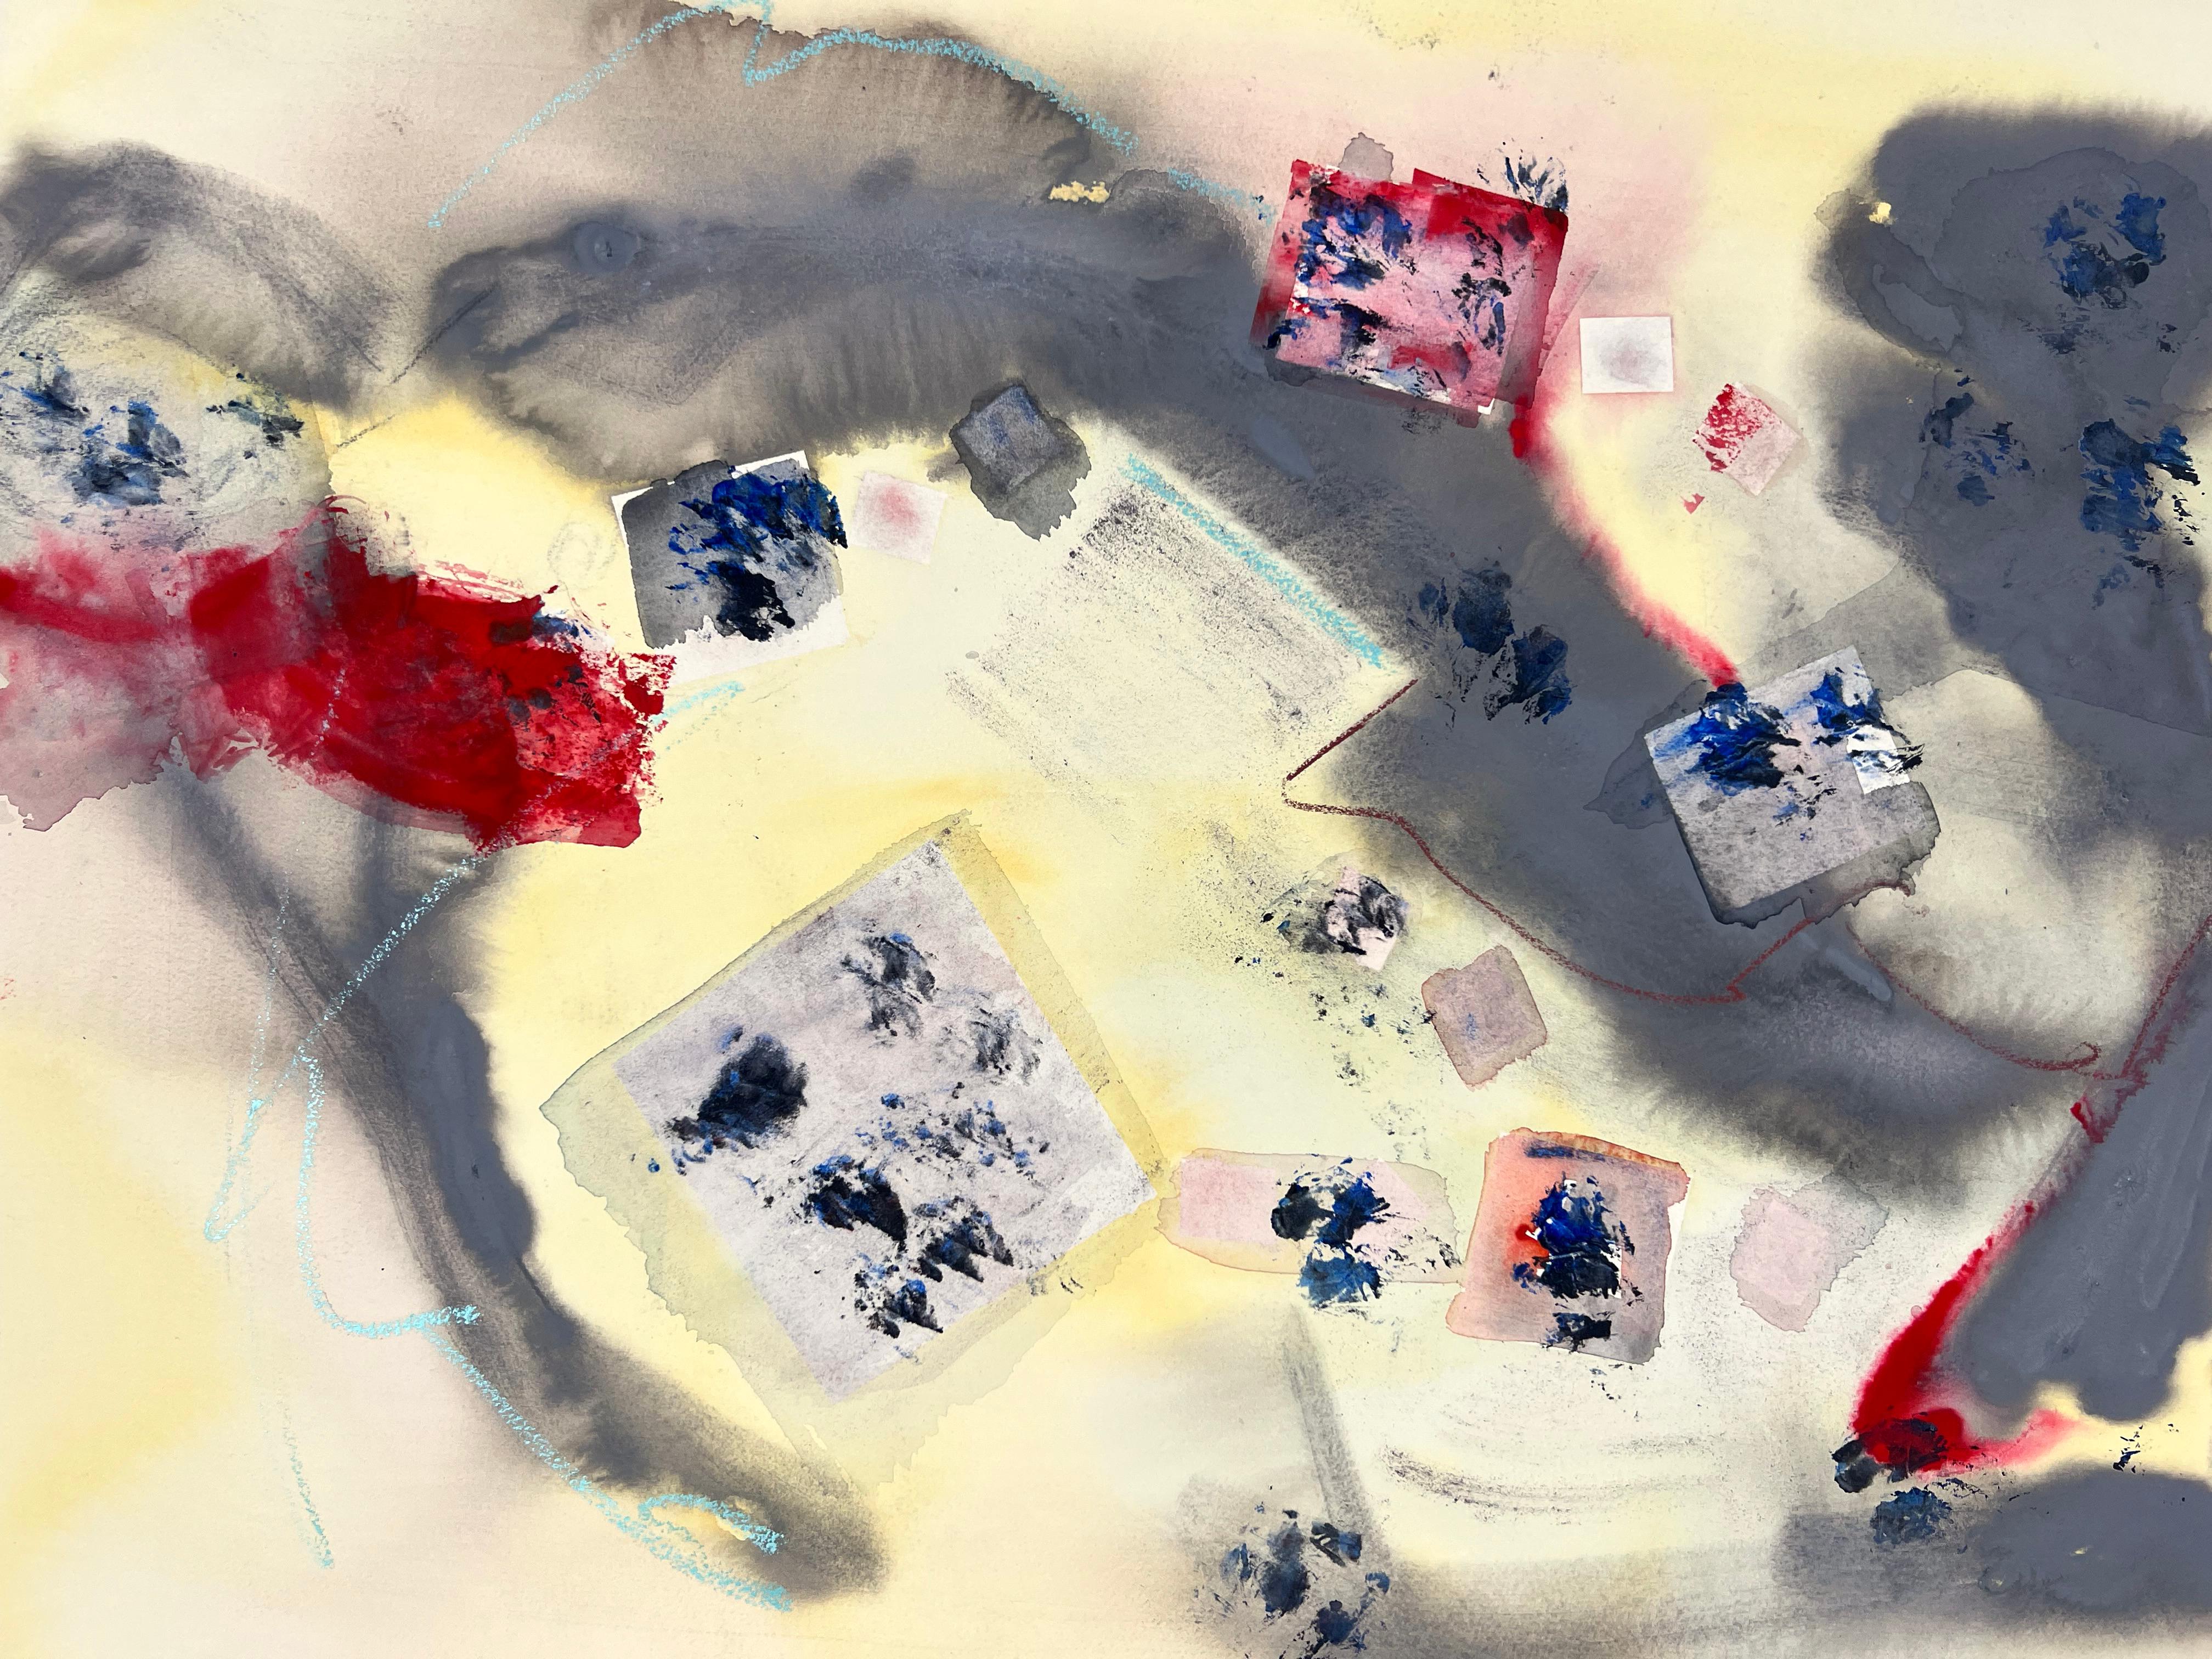 Figures at work or Play Abstraction Watercolor and Acrylic on Paper - Painting by Ricardo de Silva